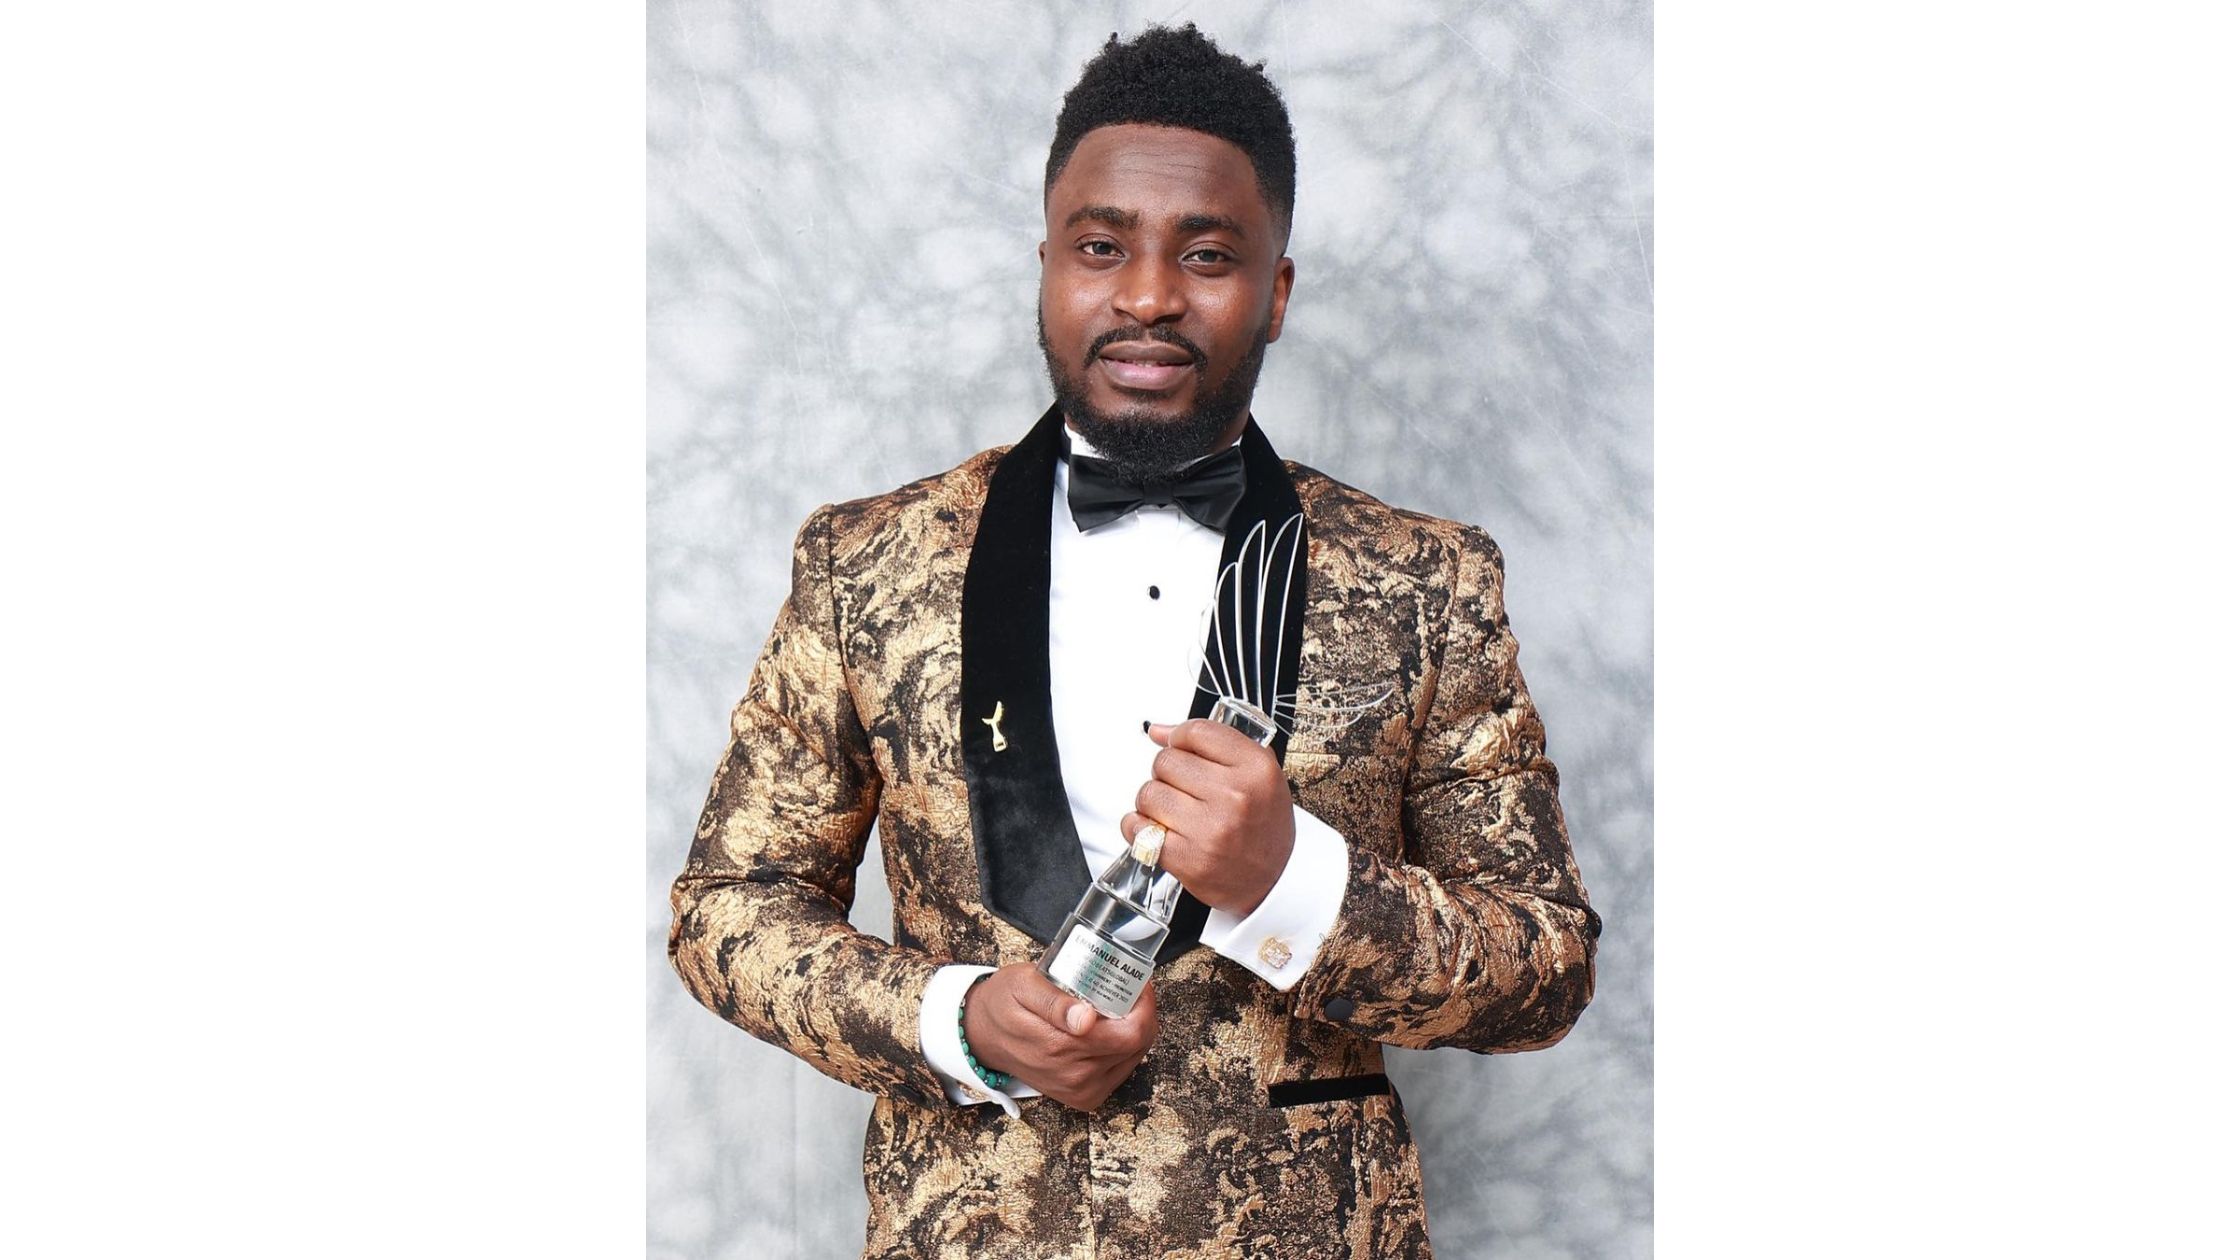 Emmanuel Alade afrobeats global ceo with the fourty under fourty award